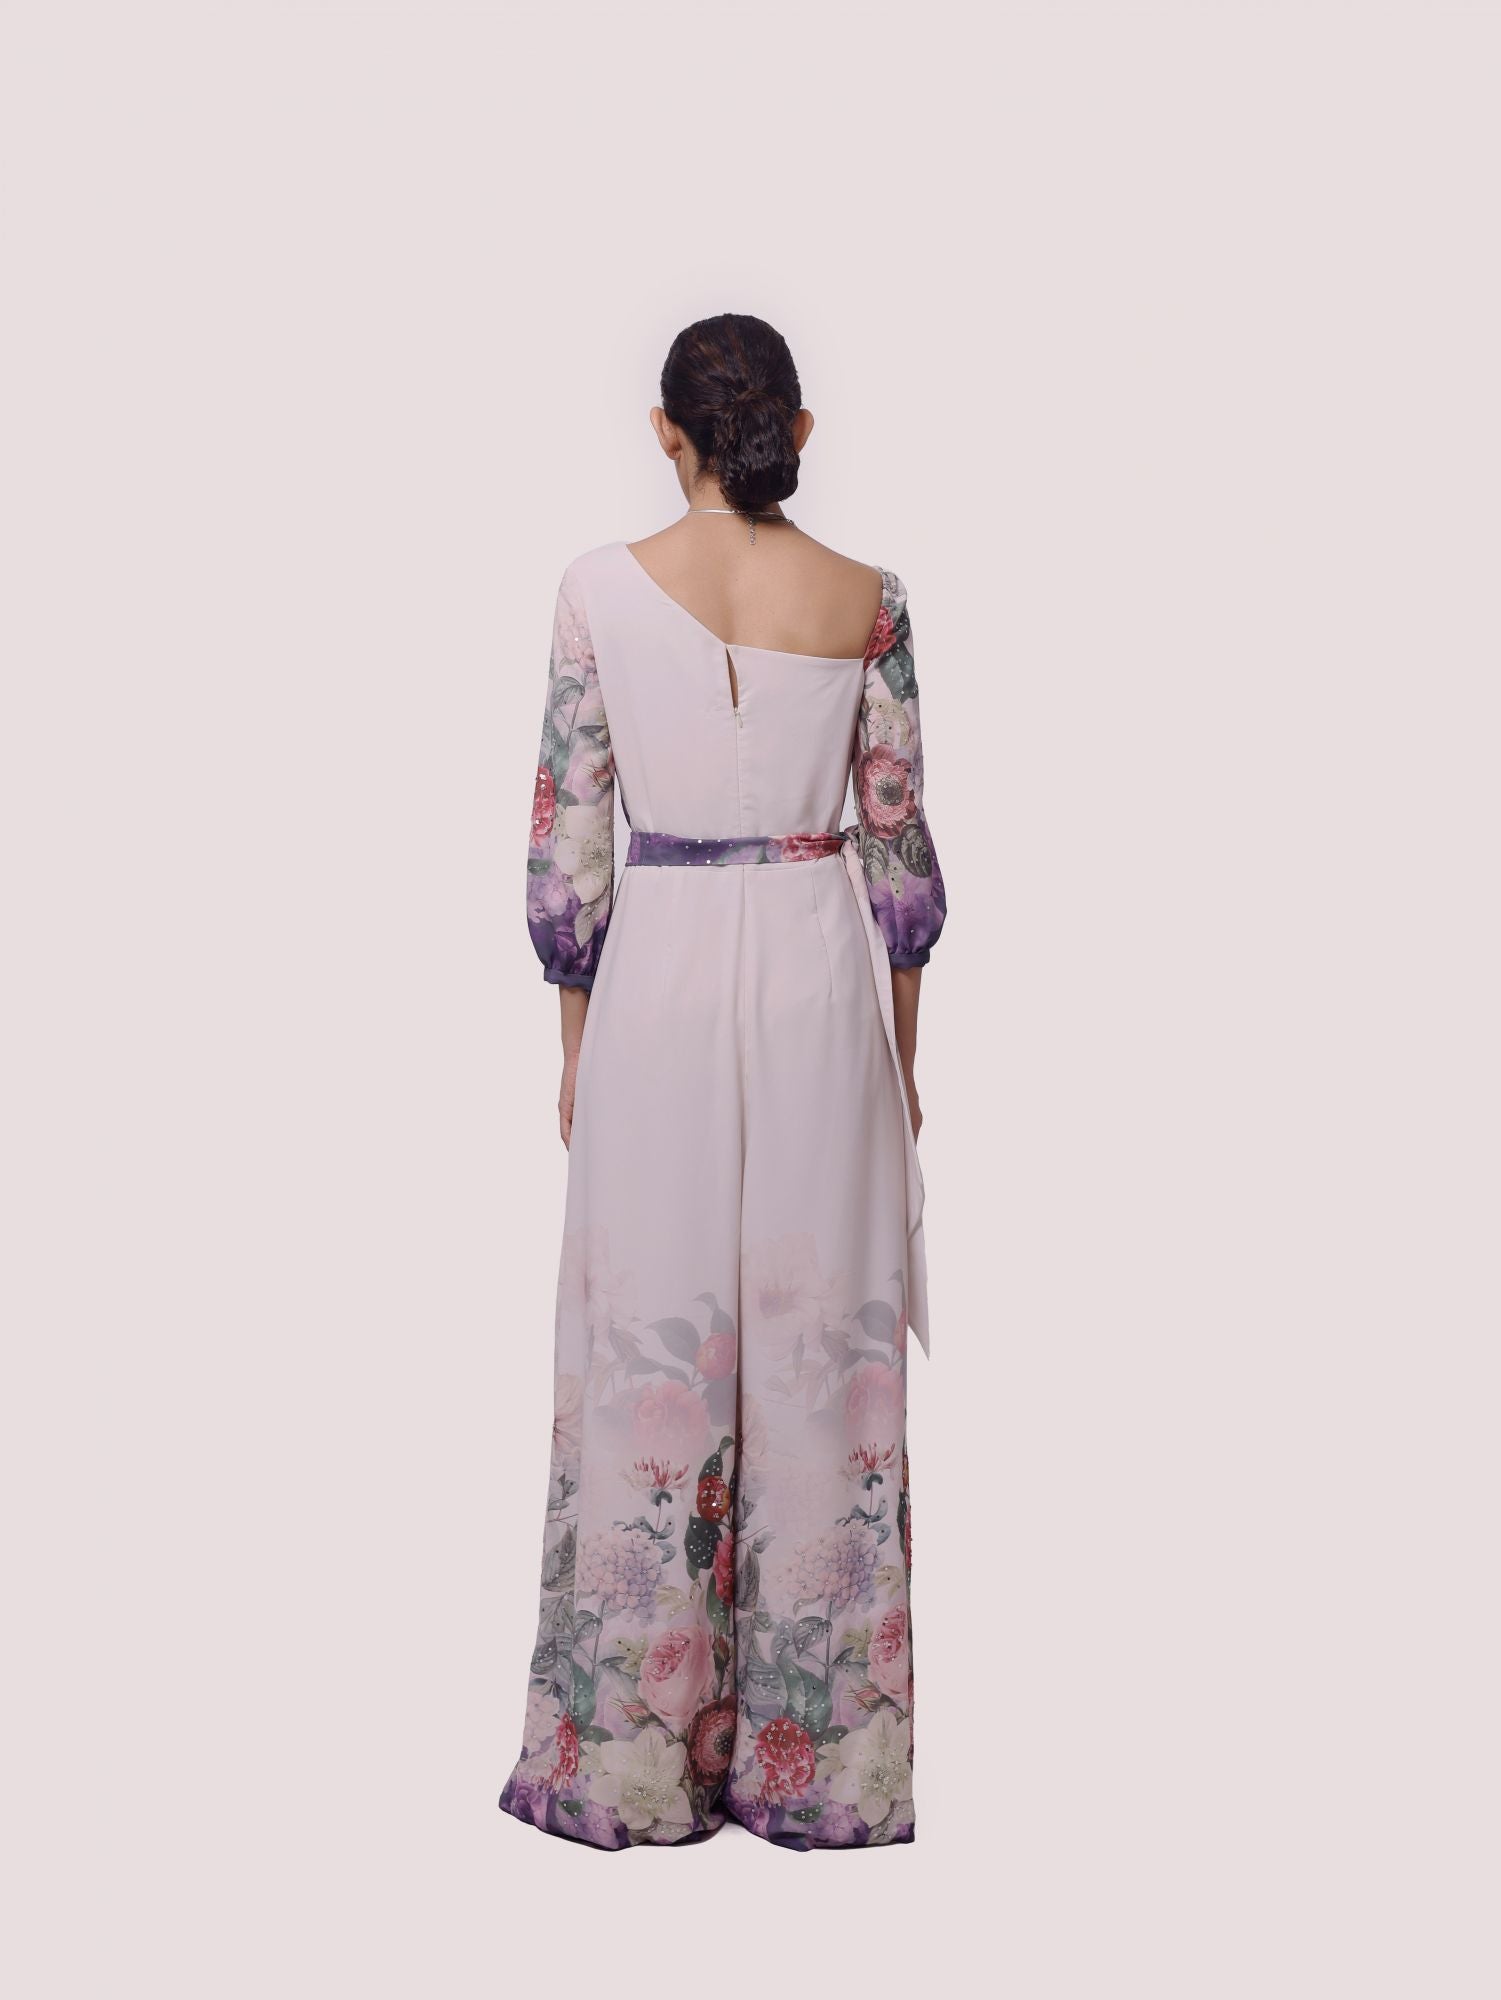 Buy stunning cream floral georgette jumpsuit online in USA. Shop the best and latest designs in embroidered sarees, designer sarees, Anarkali suit, lehengas, sharara suits for weddings and special occasions from Pure Elegance Indian fashion store in USA.-back